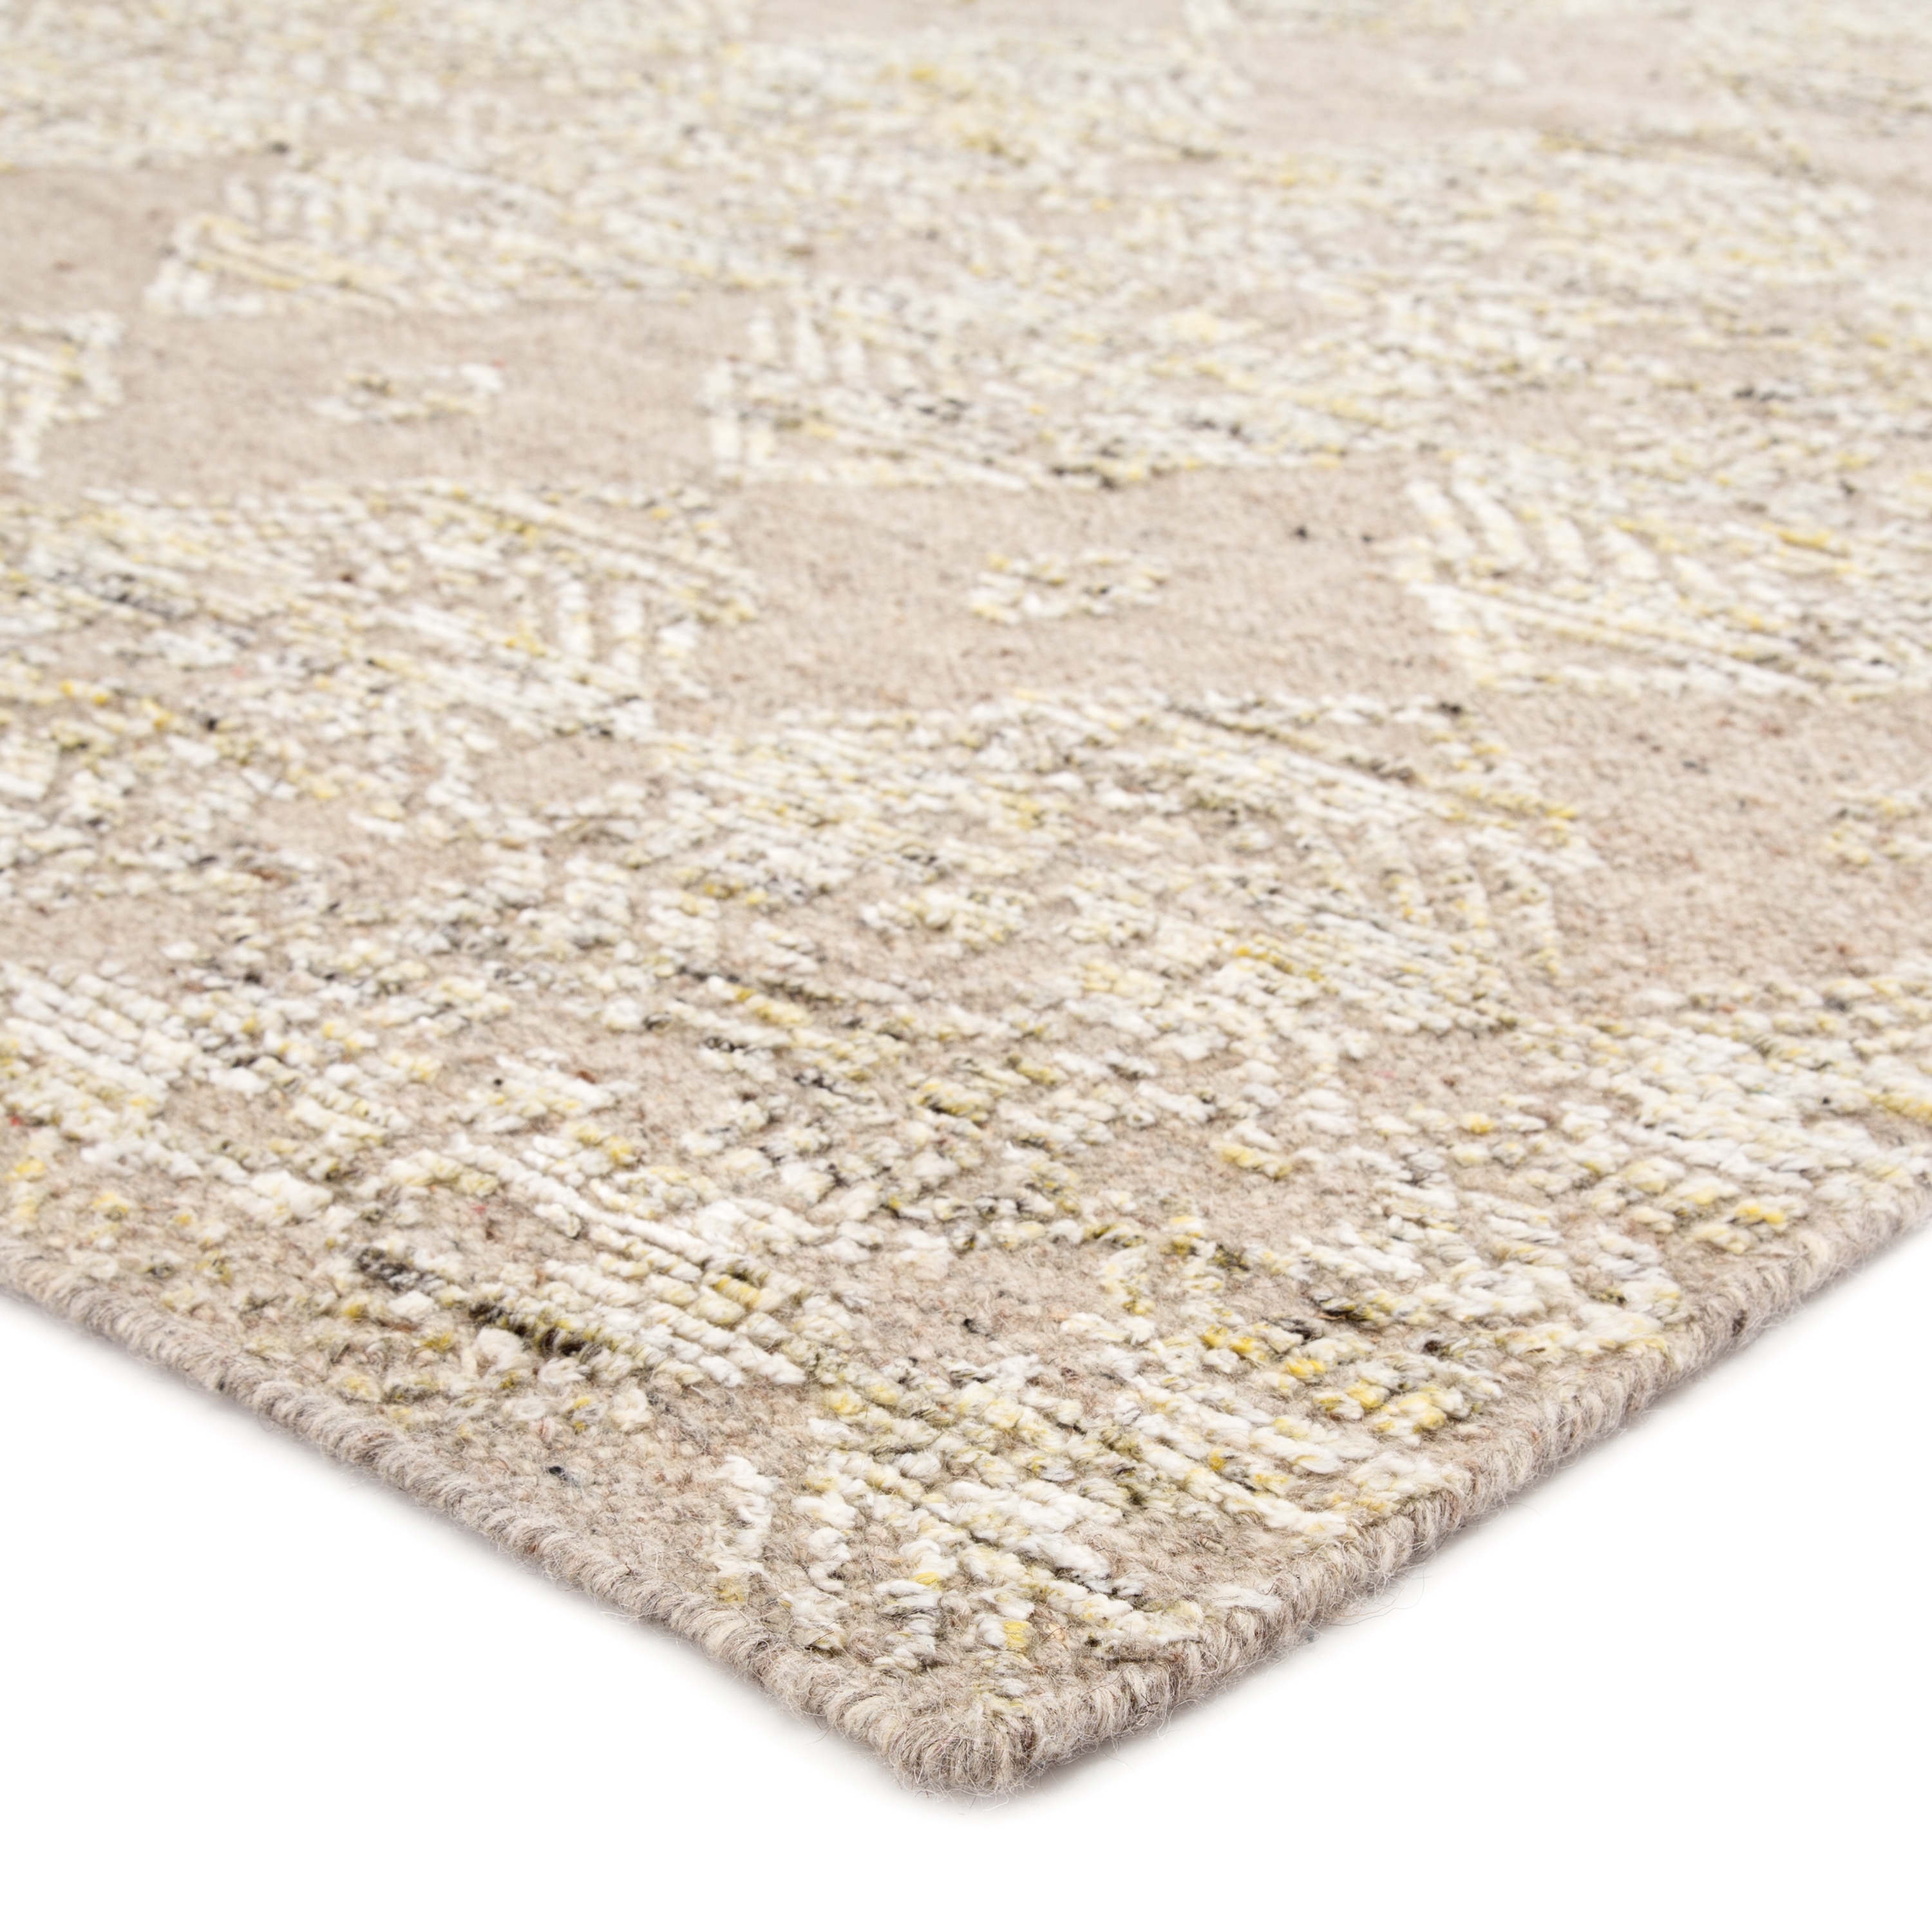 Dentelle Hand-Knotted Geometric Beige/ Gold Area Rug (8'X10') - Image 1